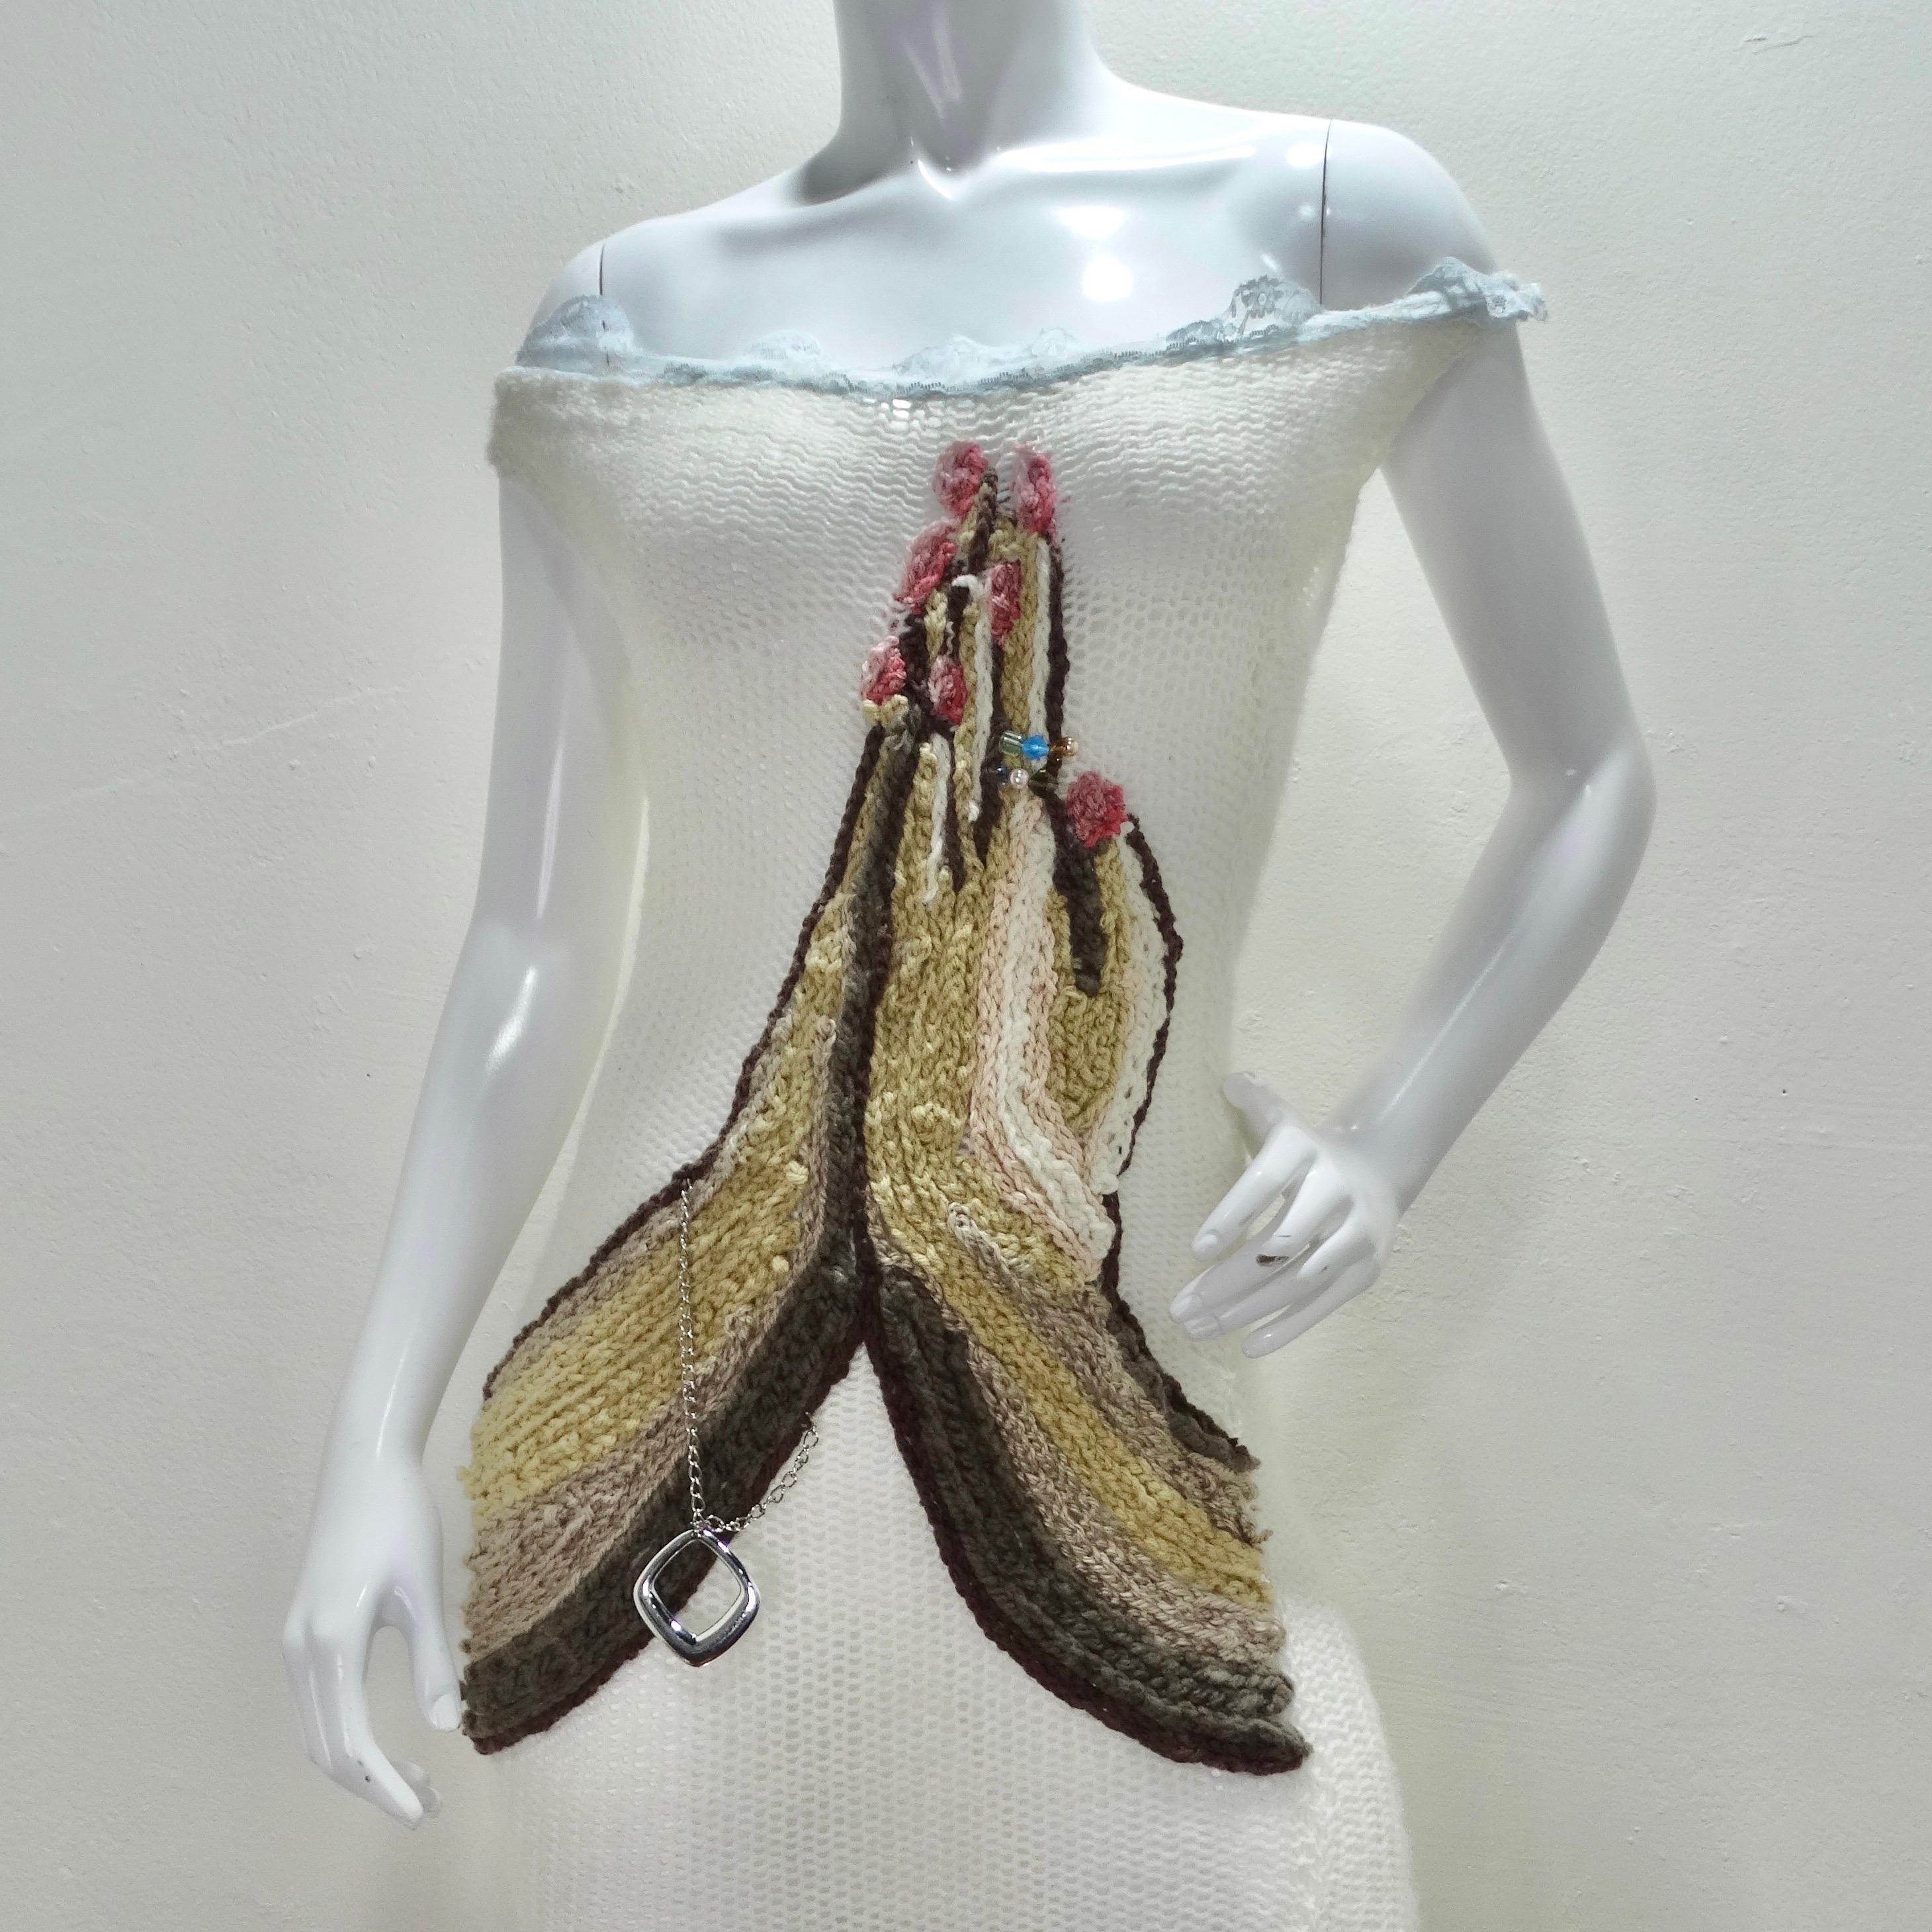 Get your hands on this one of a kind wearable work of art by emerging designer Elliana Capri! Immaculate knitted gown features stunning praying hands in the center of the dress complete with an embellished bracelet and ring! Incredible hand knit